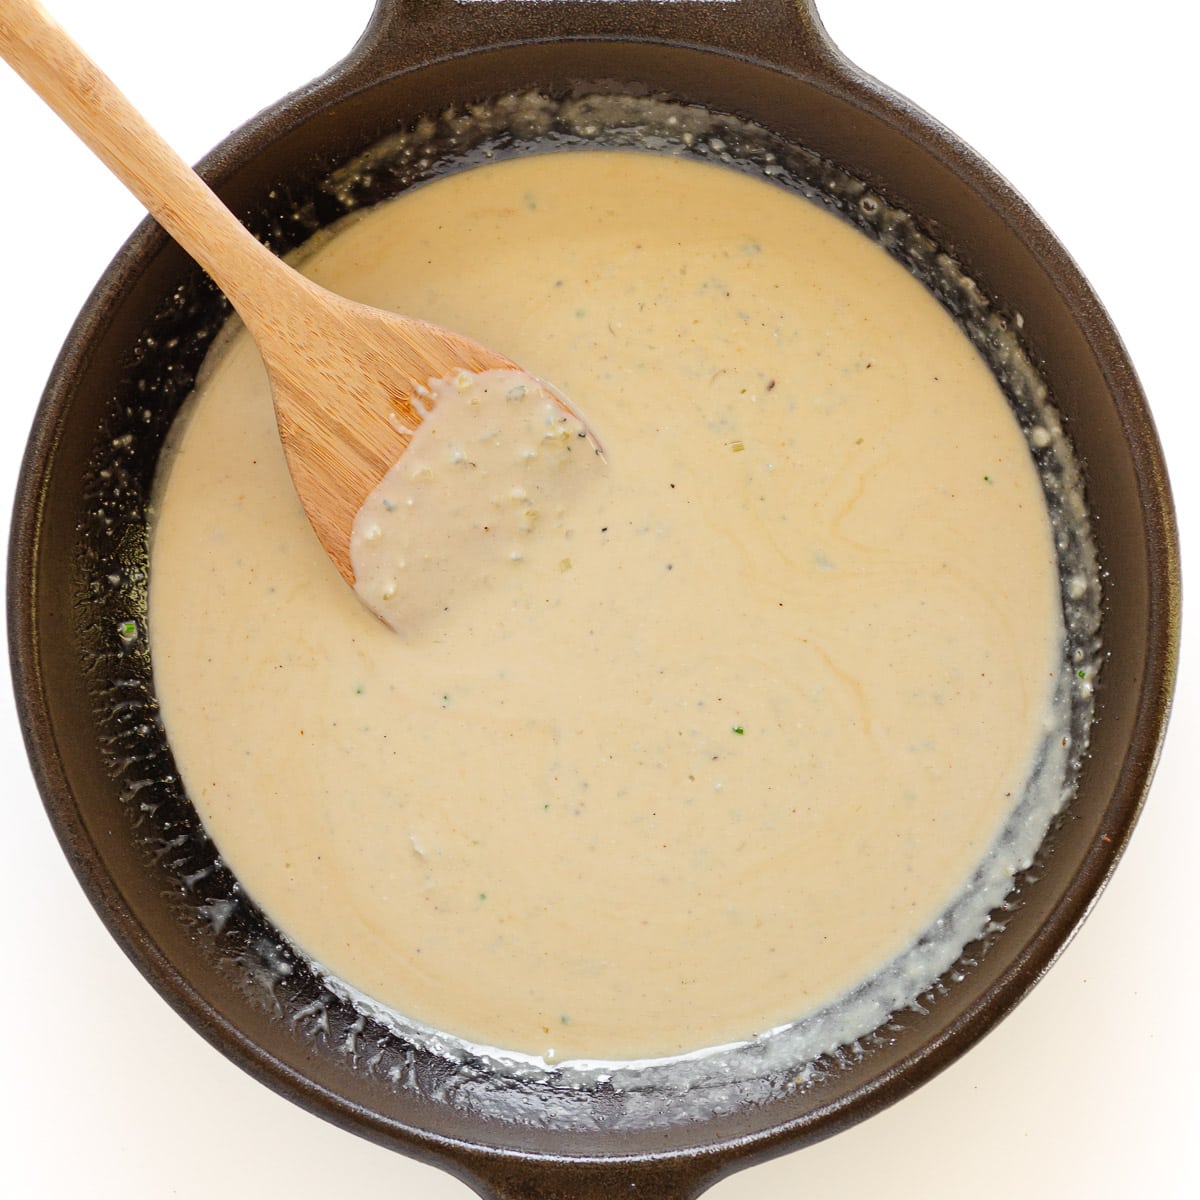 Gorgonzola cream sauce in cast iron skillet with wooden spoon.